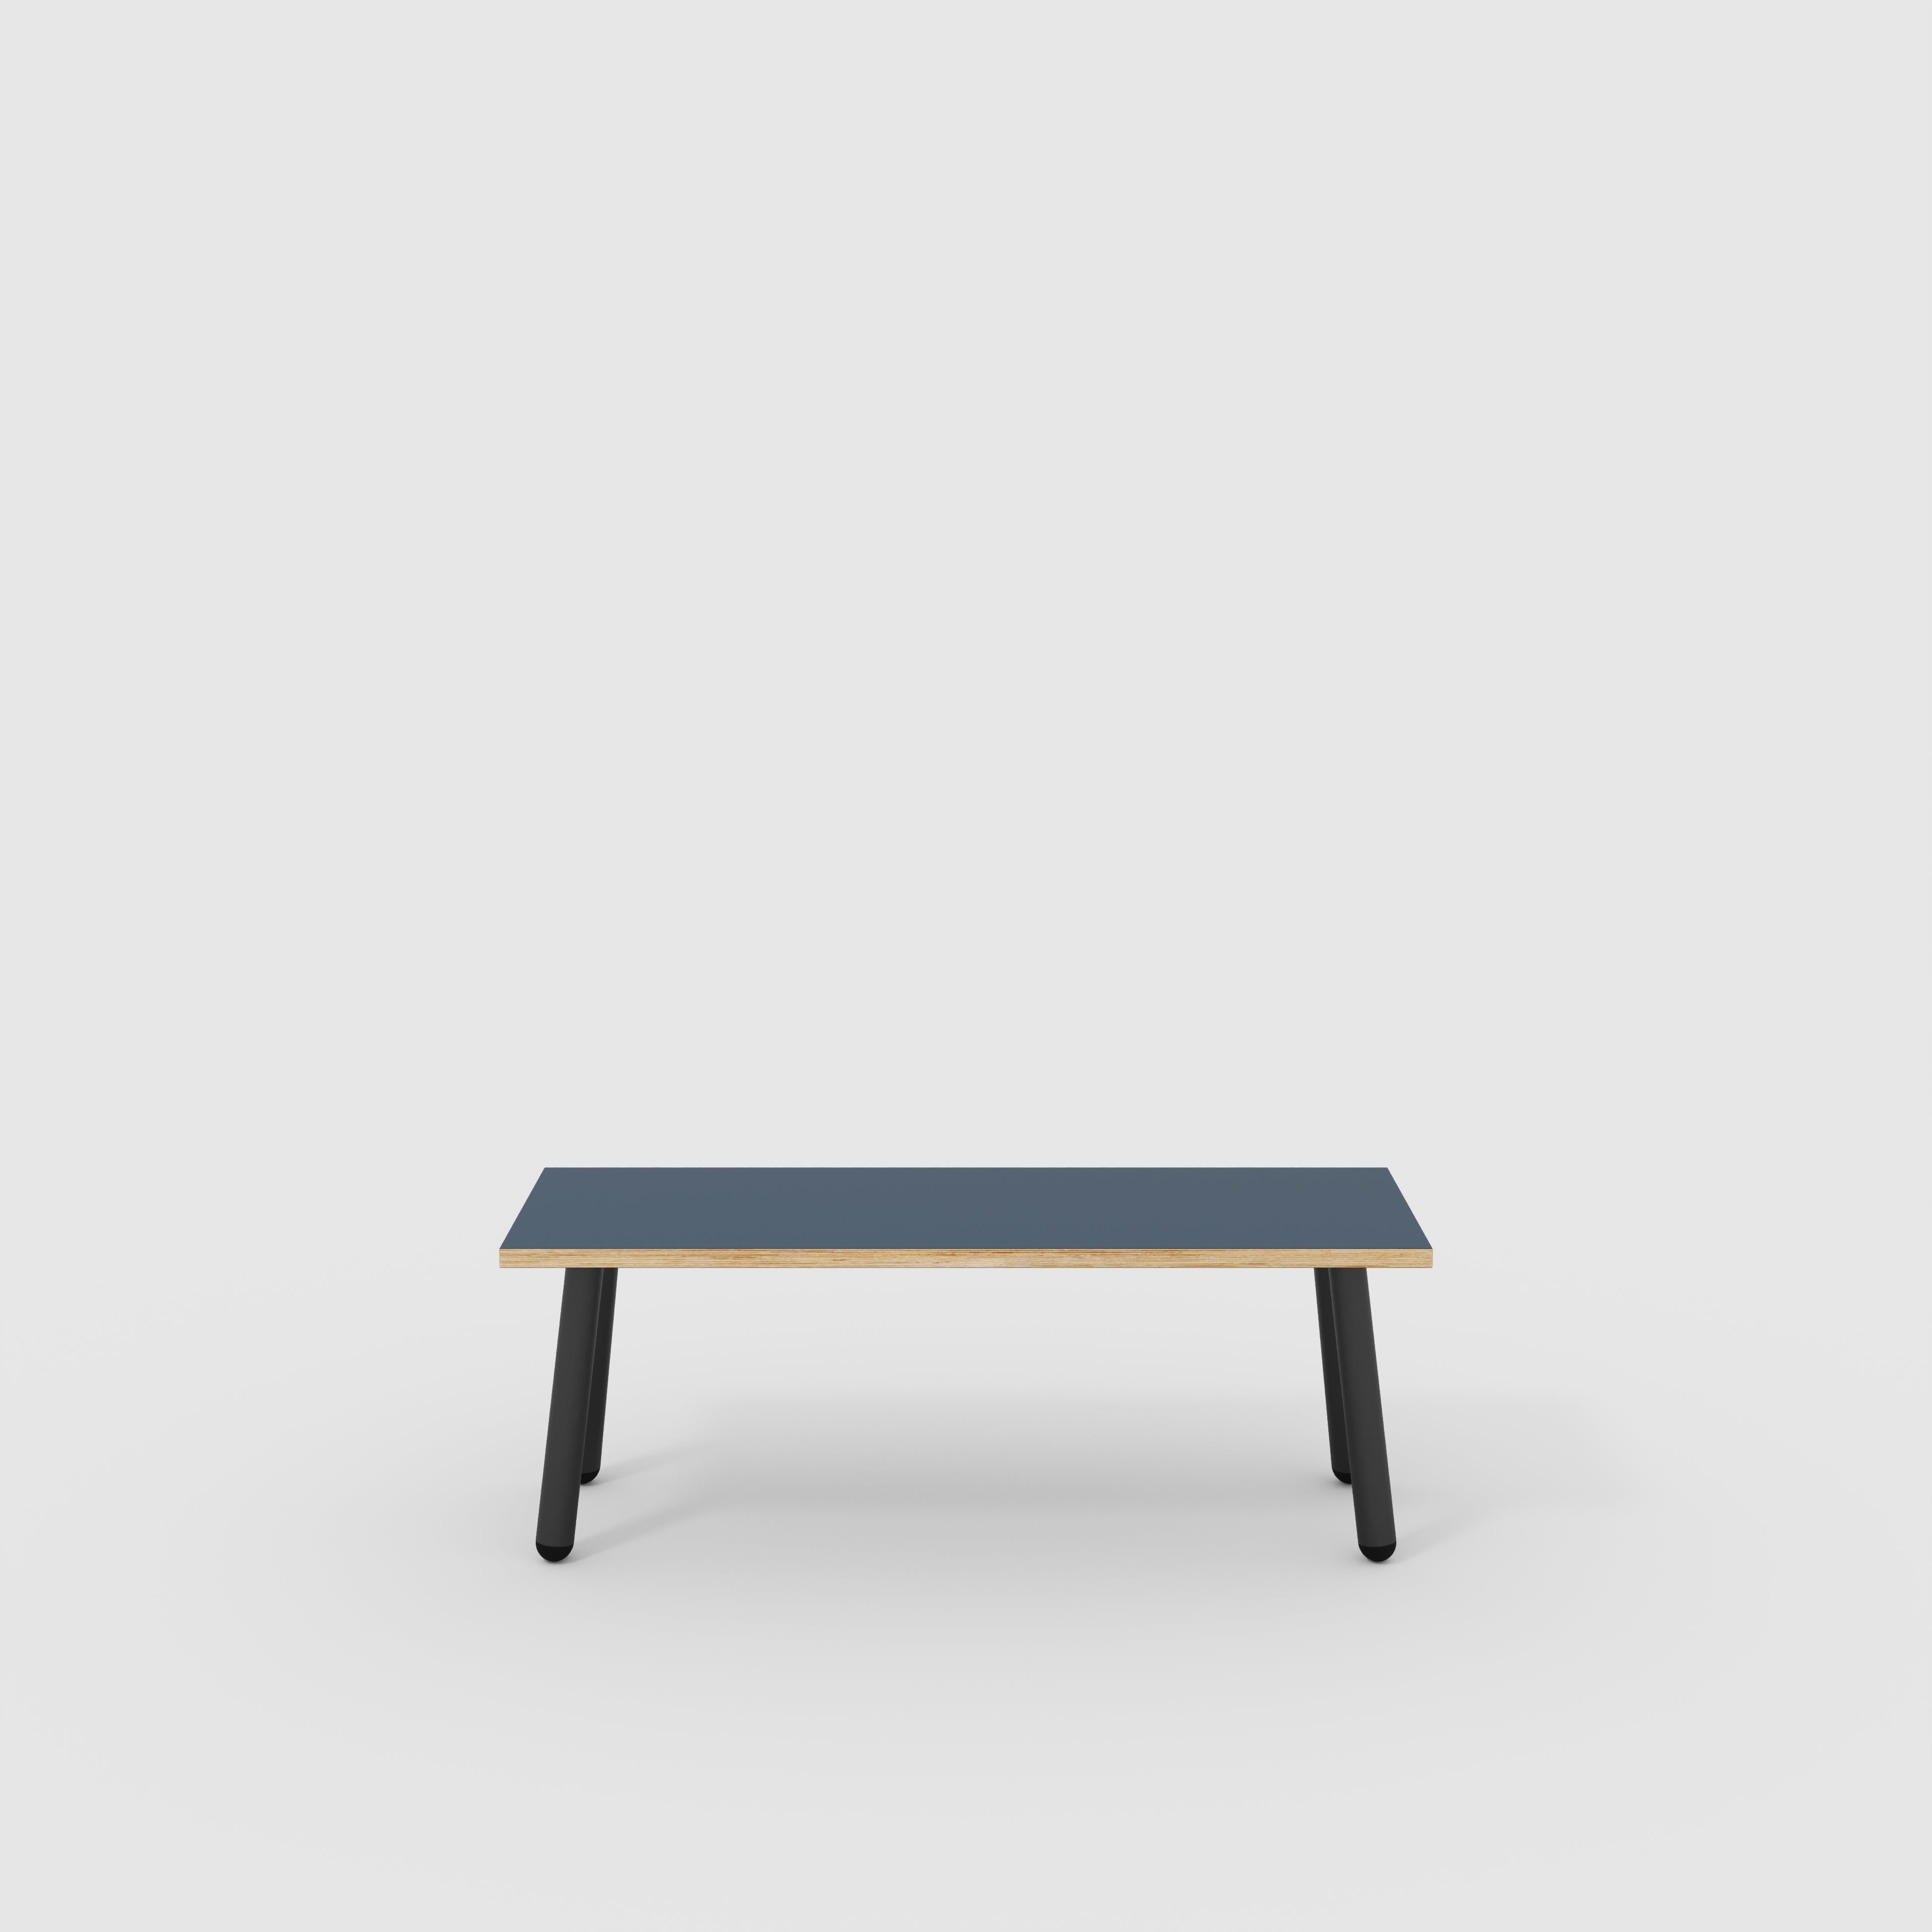 Bench Seat with Black Round Single Pin Legs - Formica Night Sea Blue - 1200(w) x 400(d)